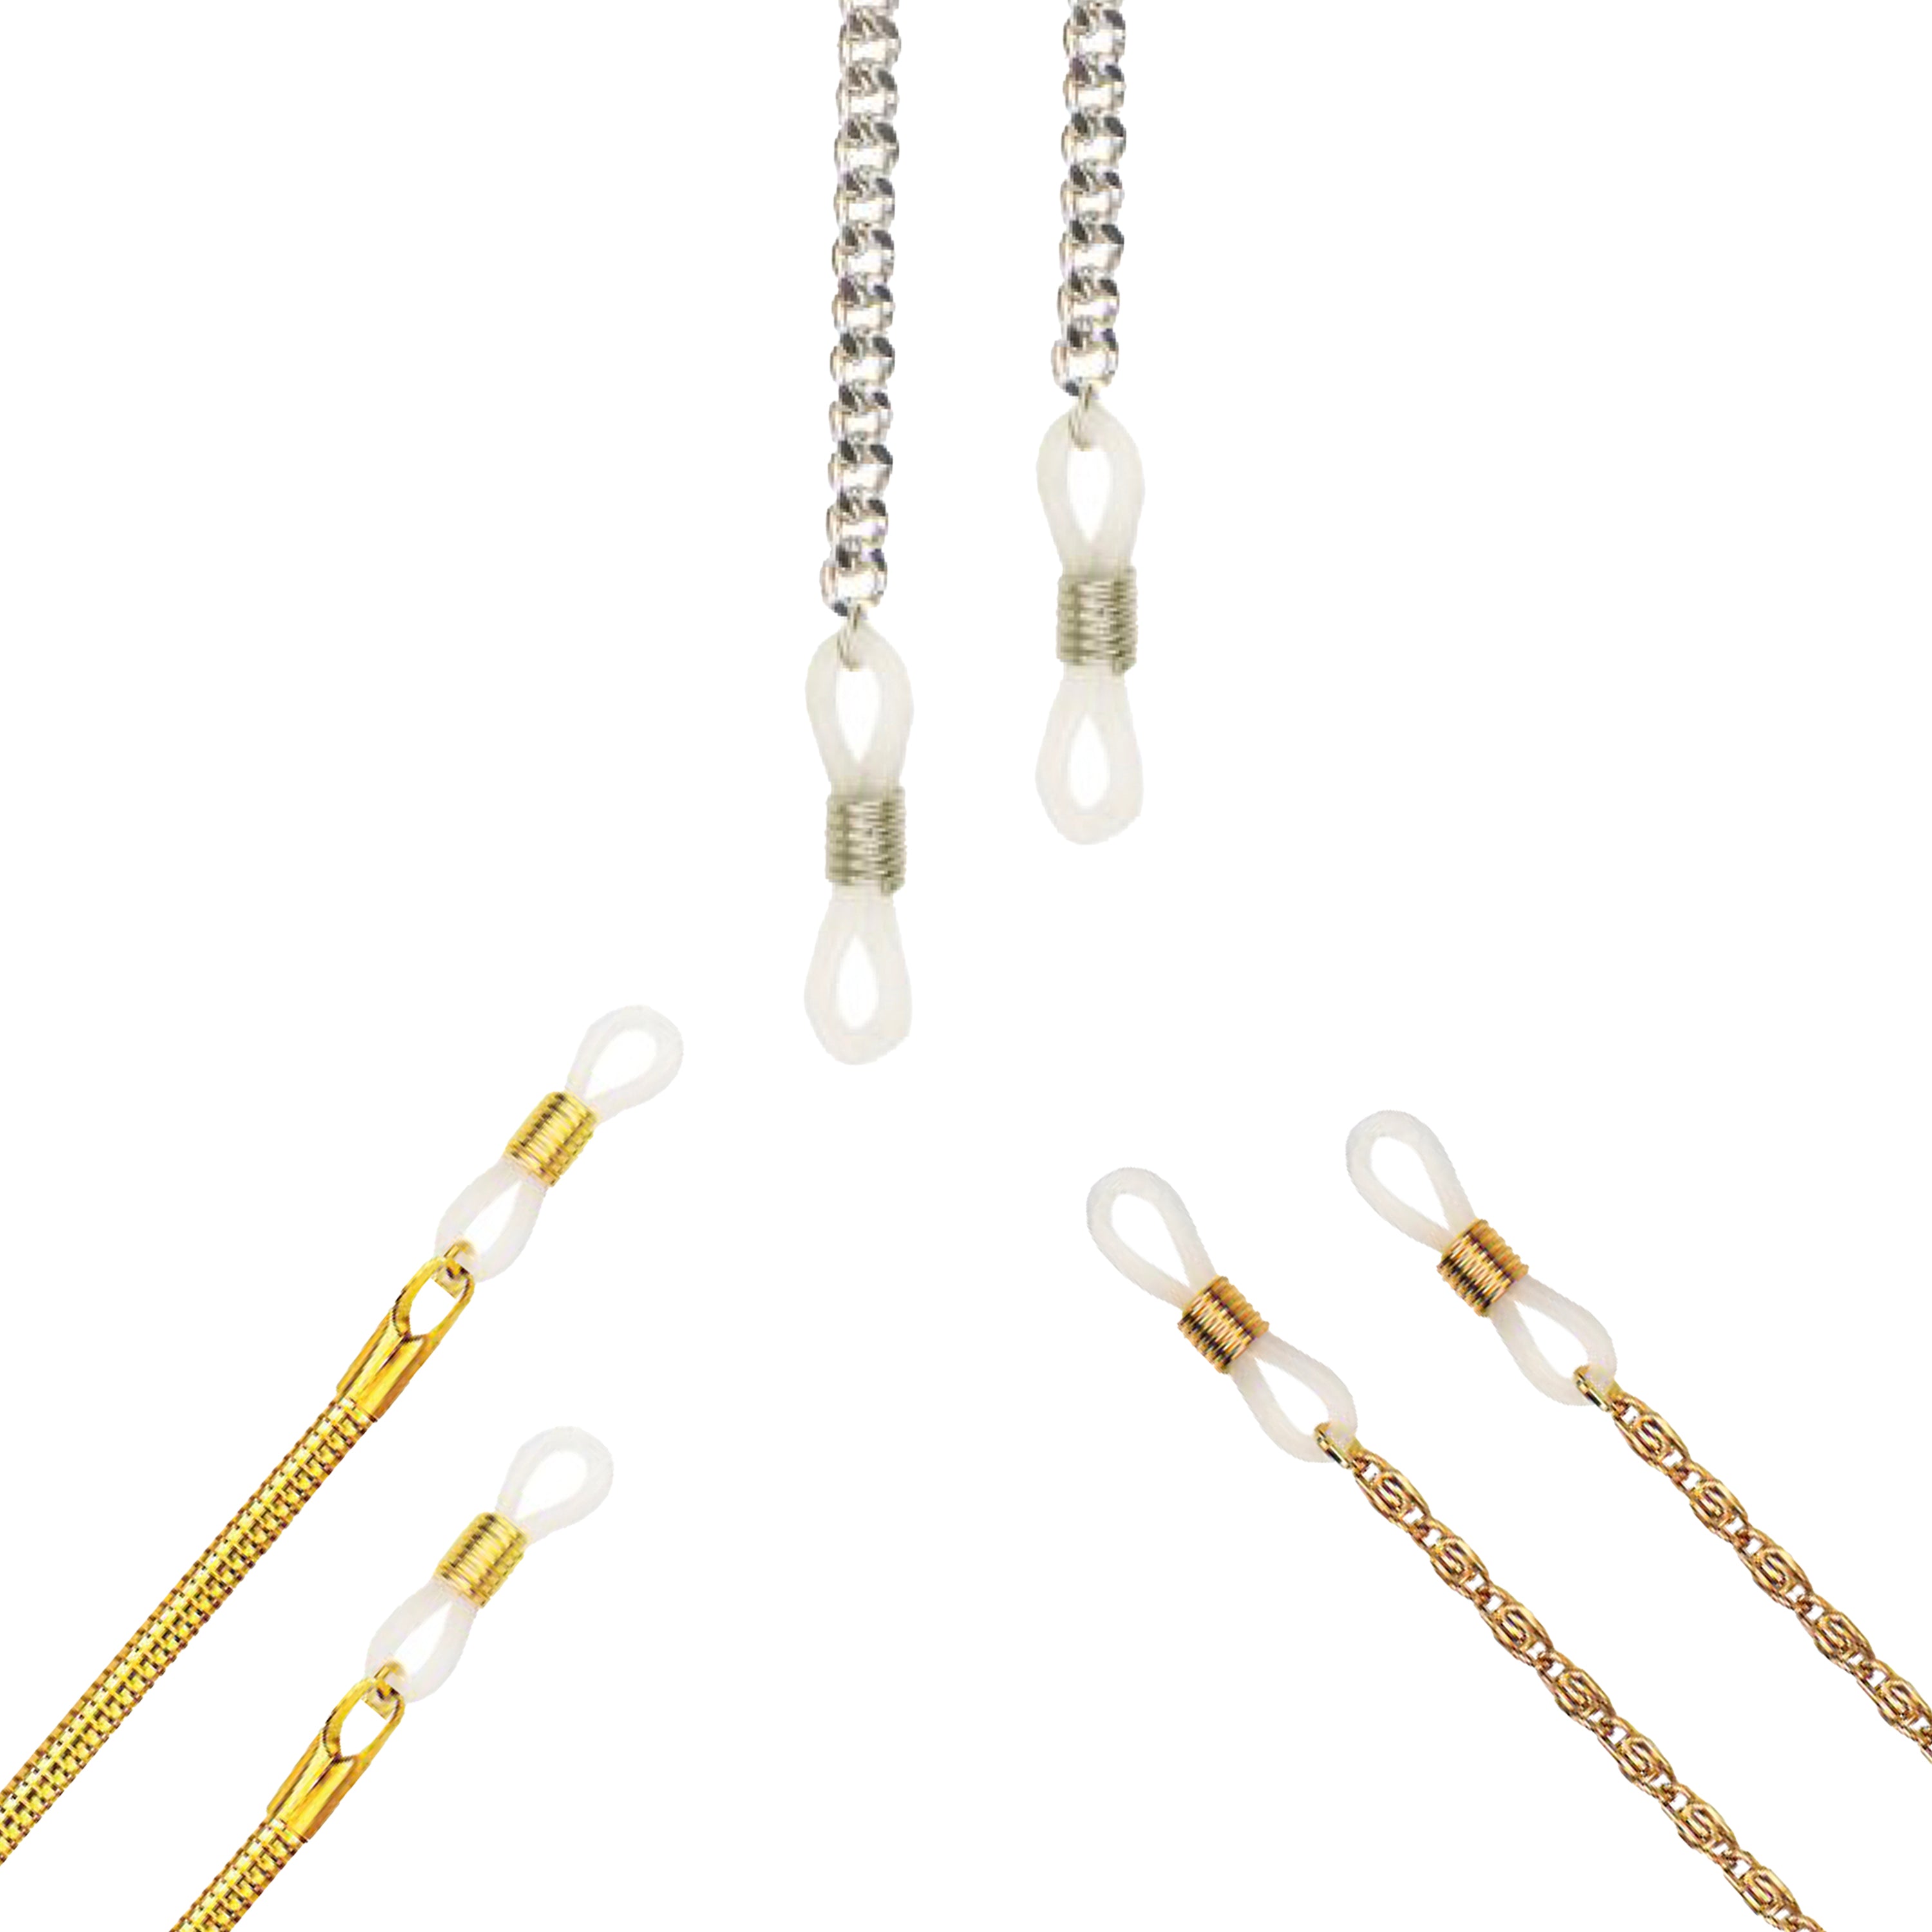 QUICK PICK PACK - Eyeglass Chains – Dynamic Labs